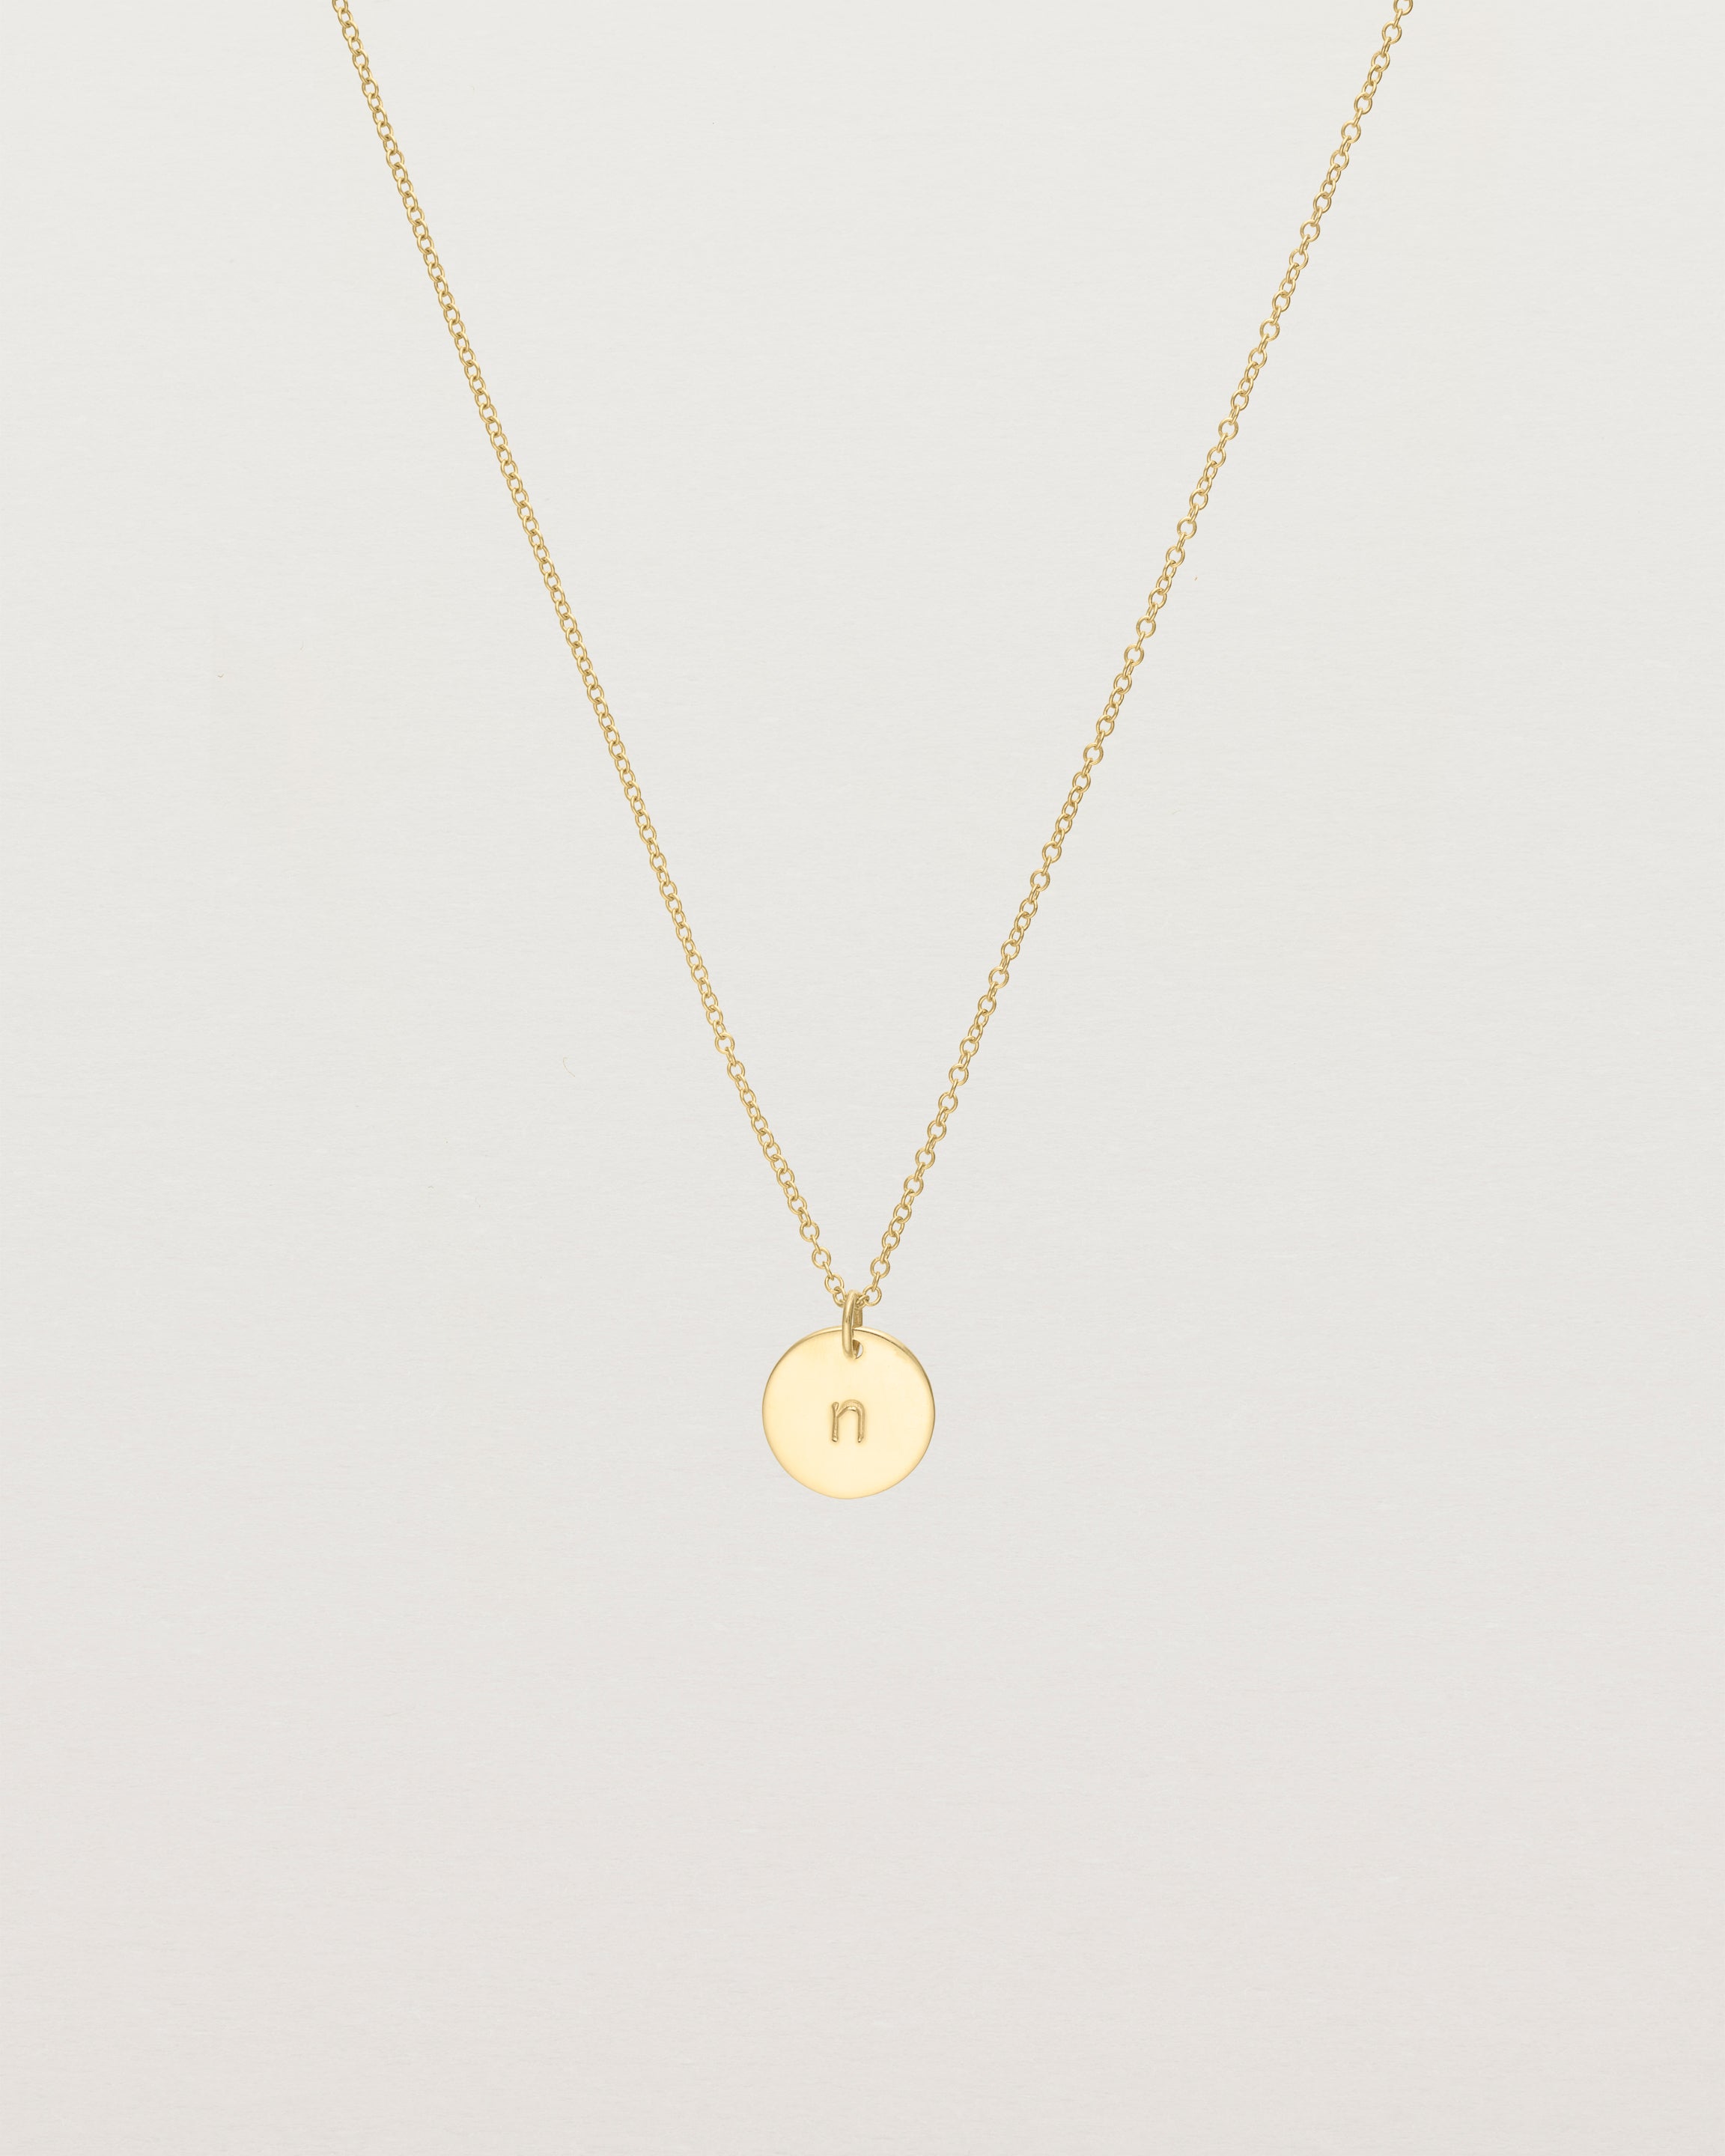 Front view of the Mini Initial Necklace in Yellow Gold.